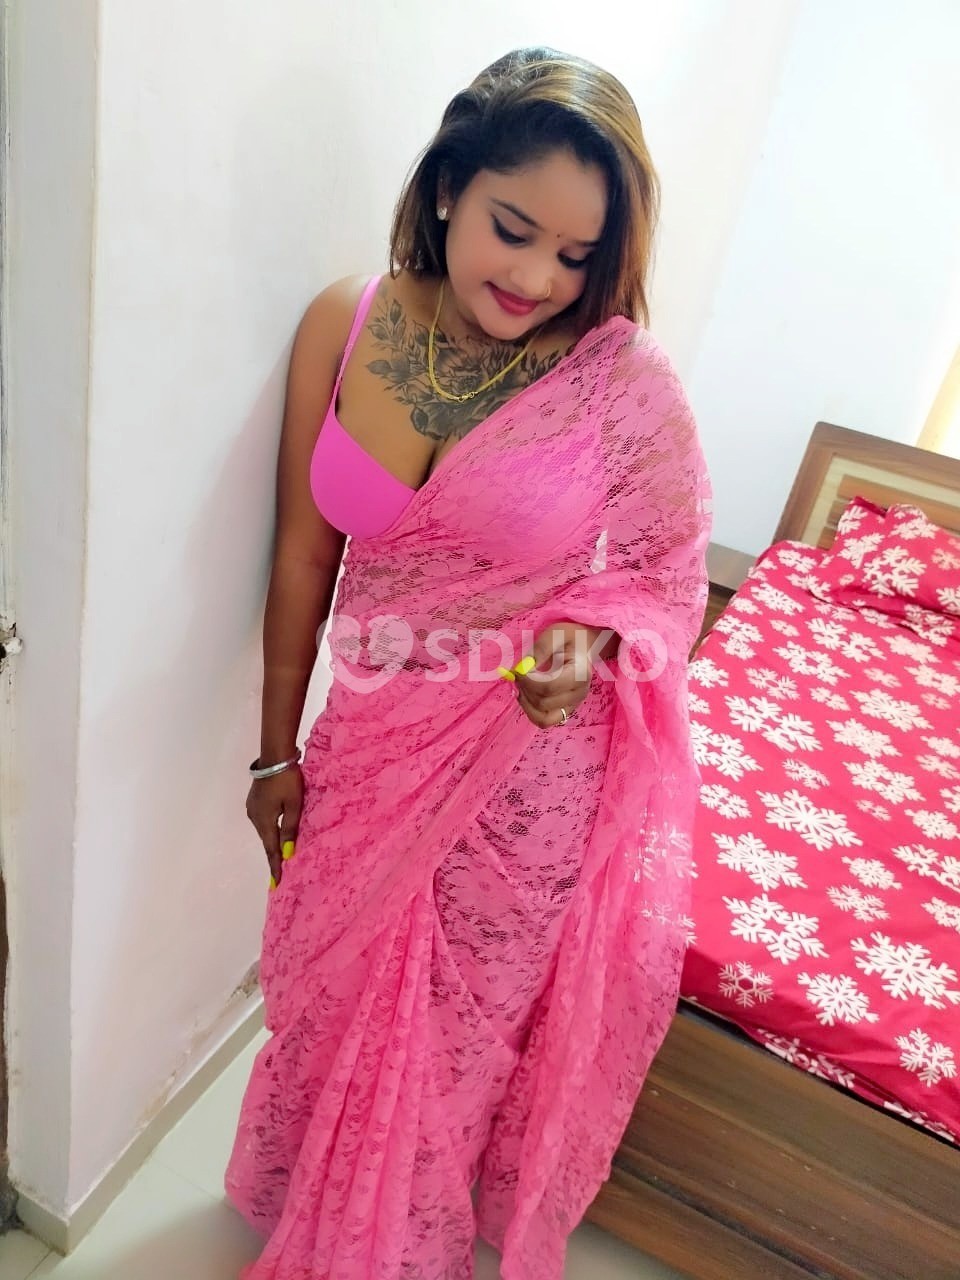 Kukatpally Dishu) (V I P) LOW RATE DIRECT ESCORT FULL SAFE AND SECURE 24 HORSE AVAILABLE BHABHI AND COLLEGE GIRL AUNTY A